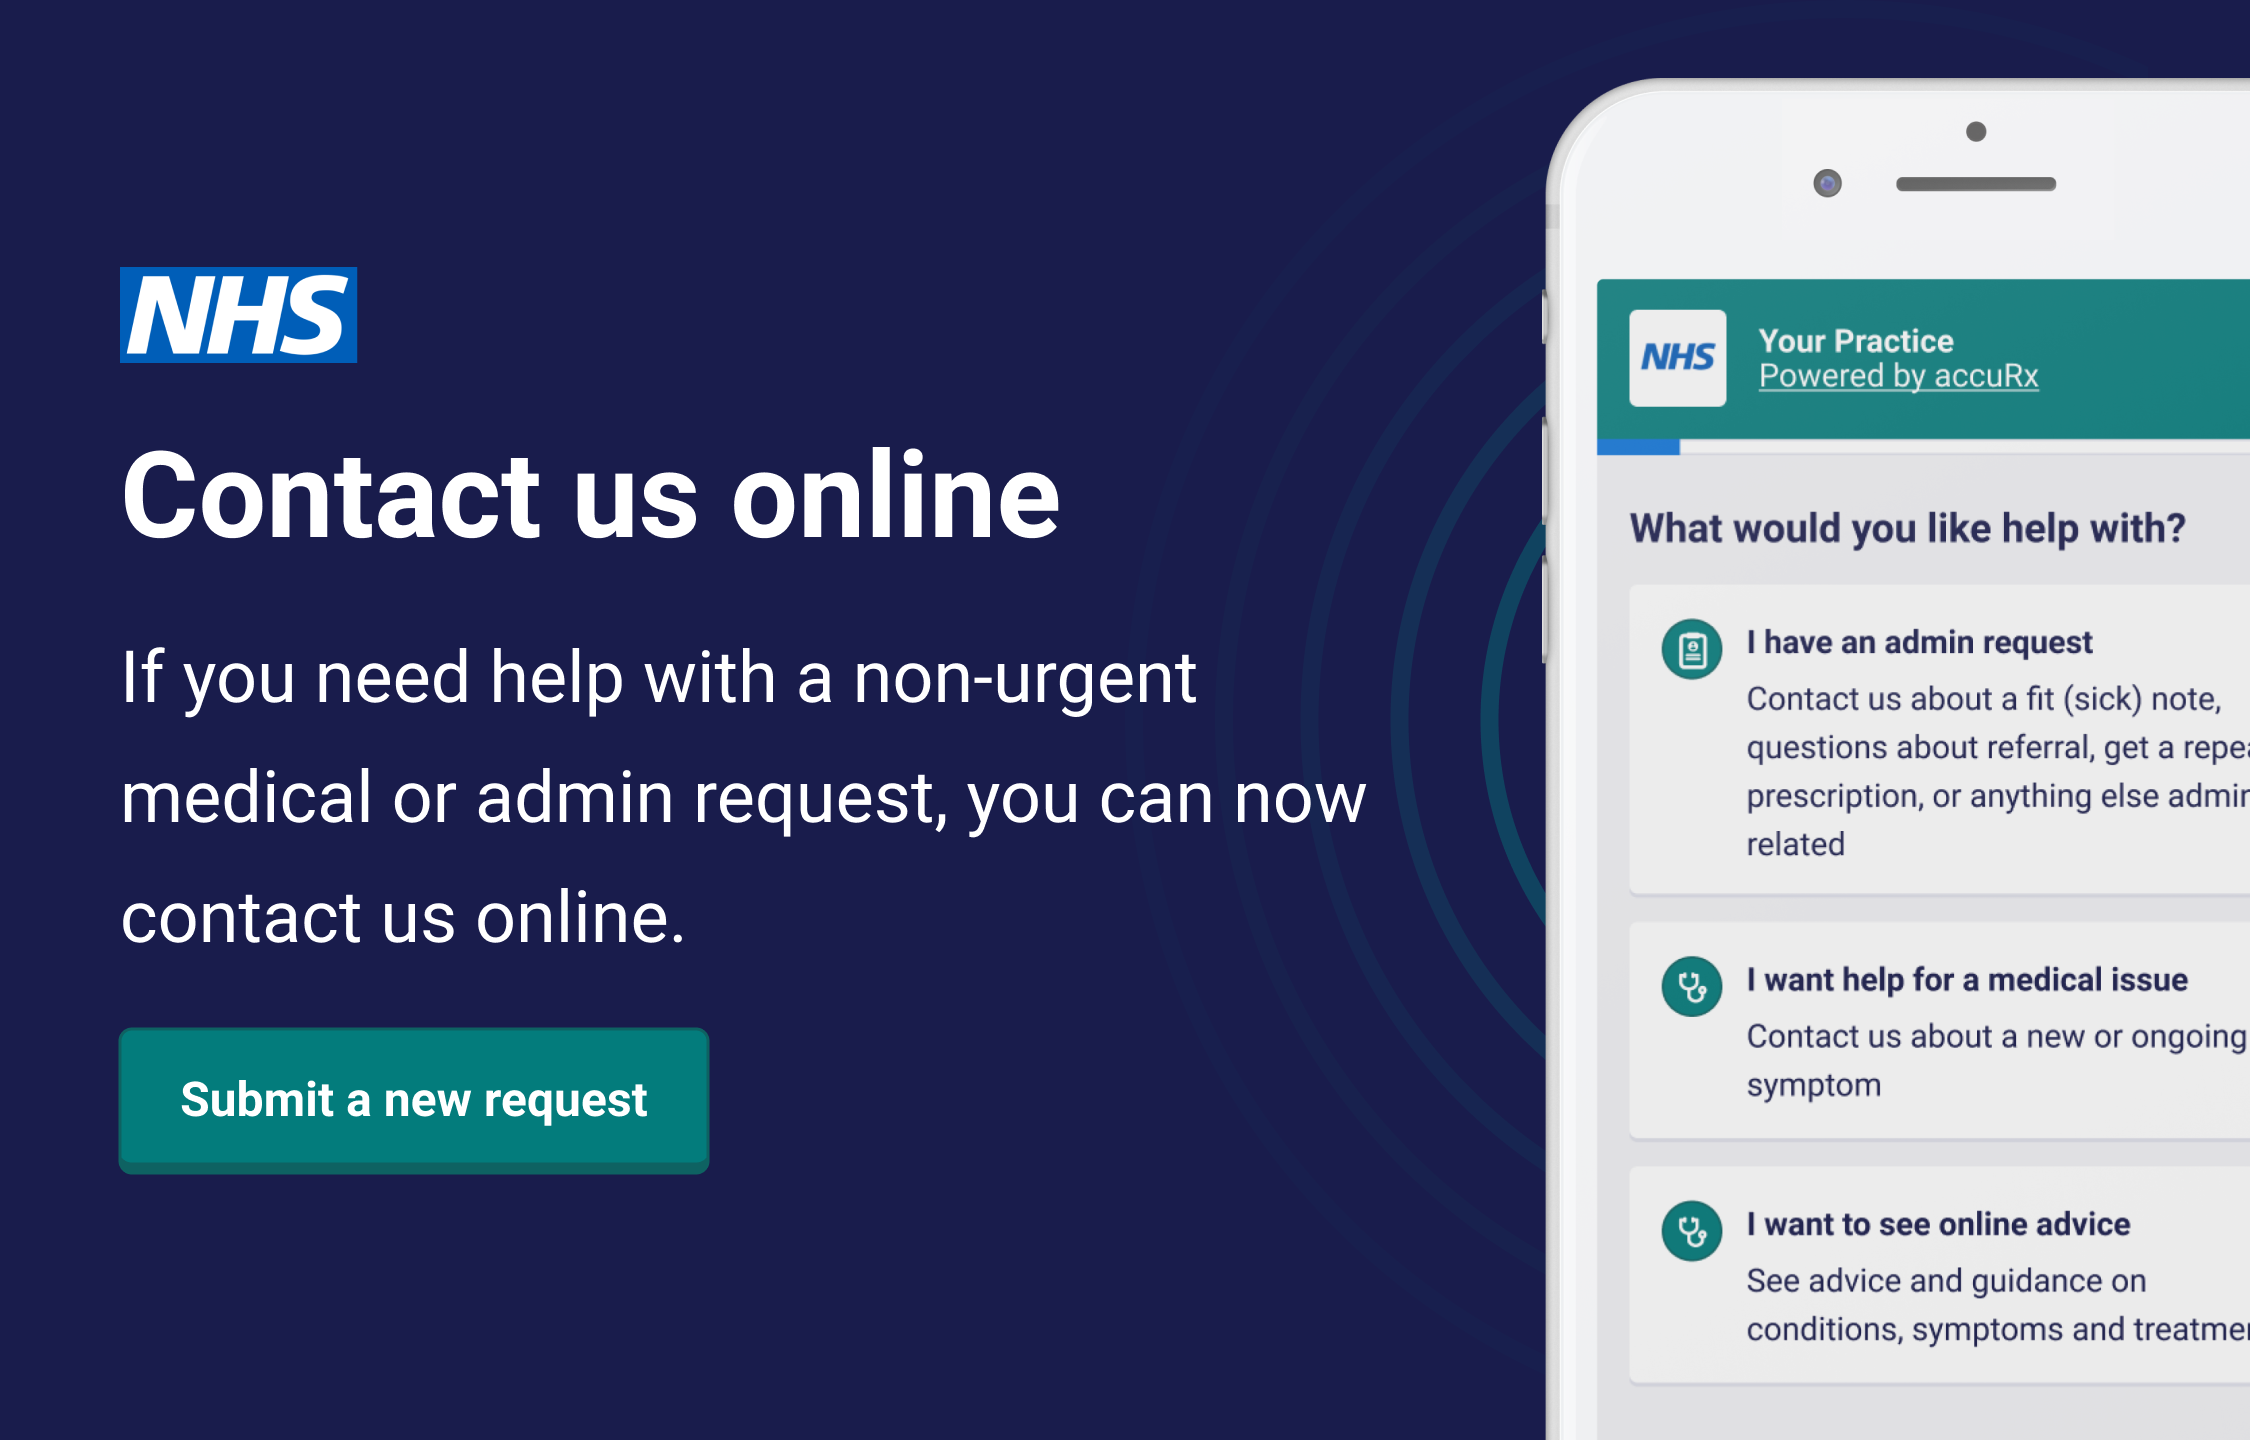 Contact us online. If you need help with a non-urgent medical or admin request you can now contact us online. Submit a new request